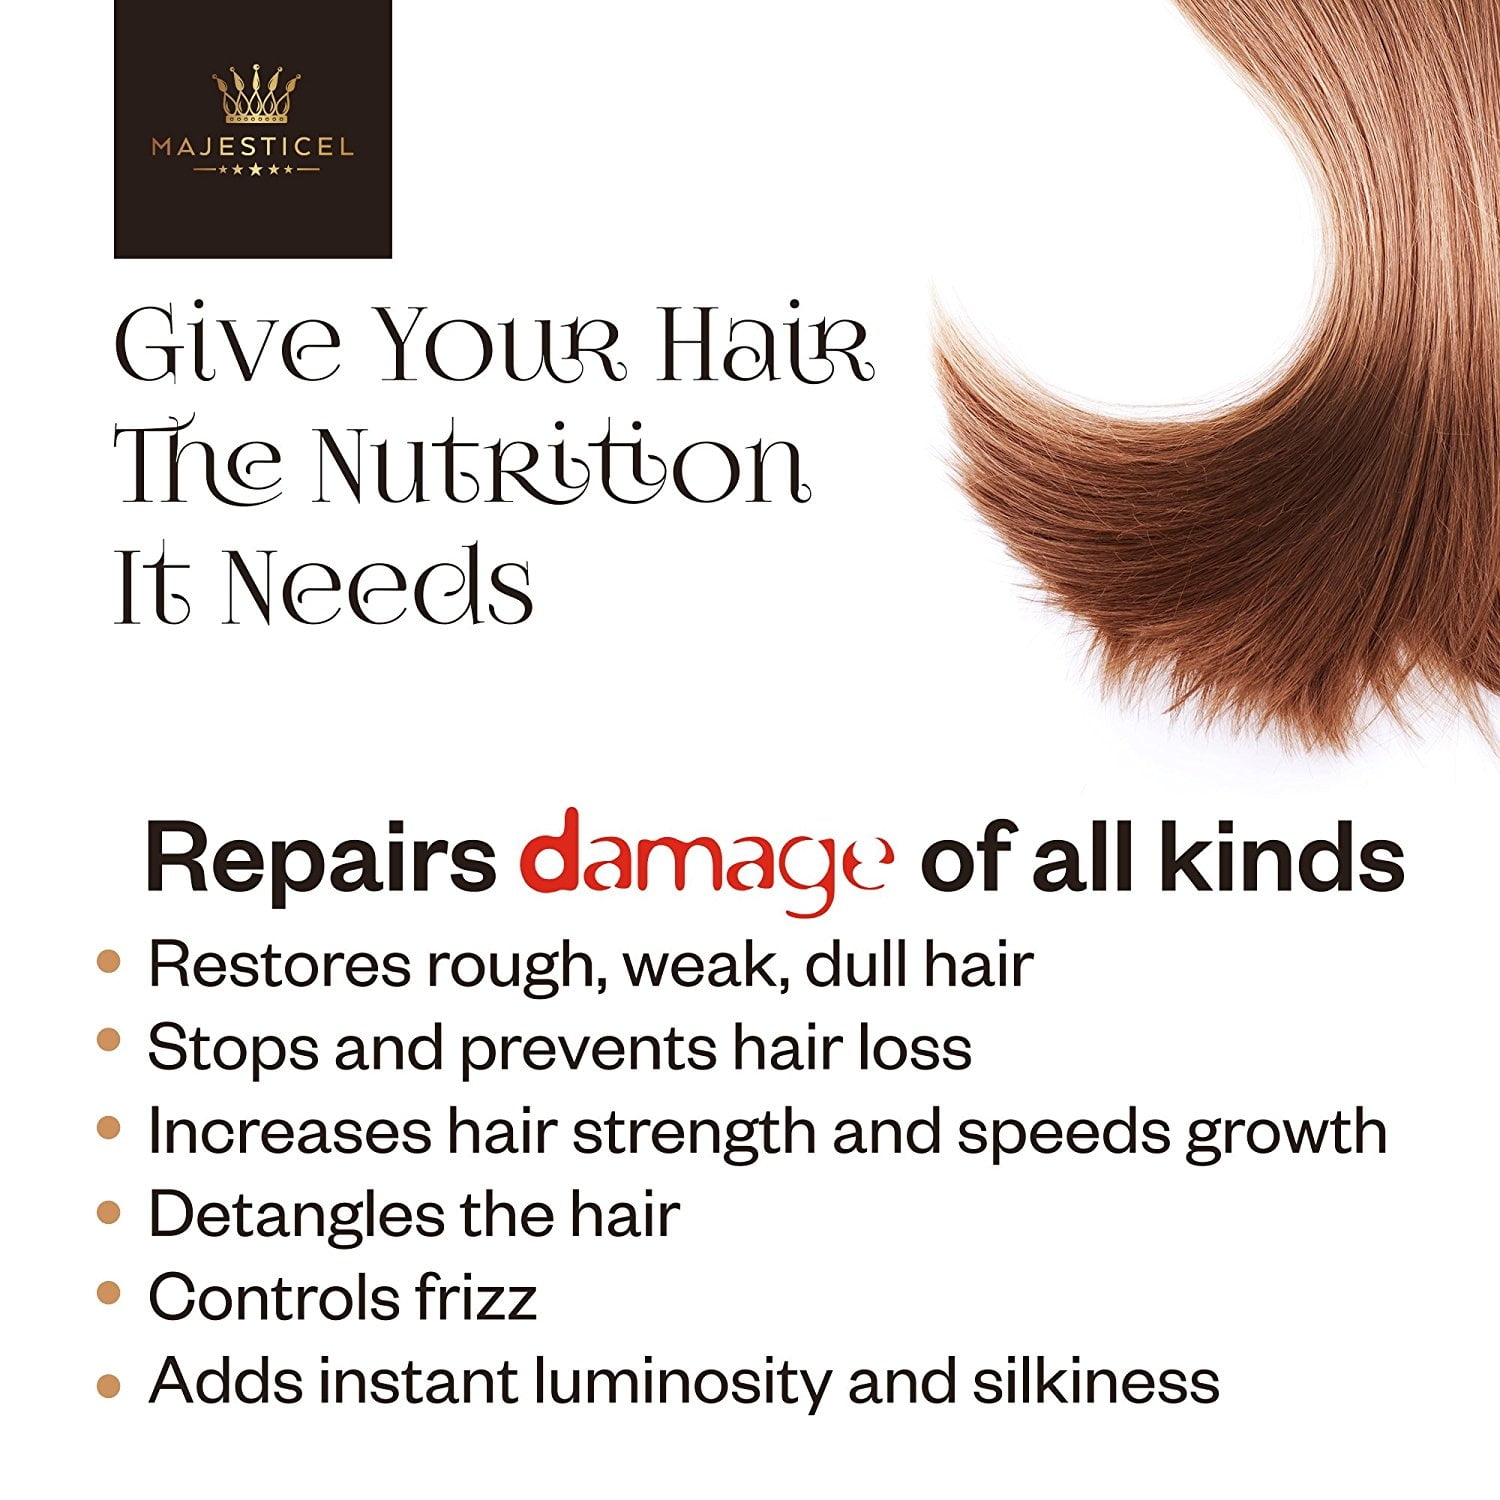 Majesticel Best Argan Oil For Hair Promotes Hair Growth And